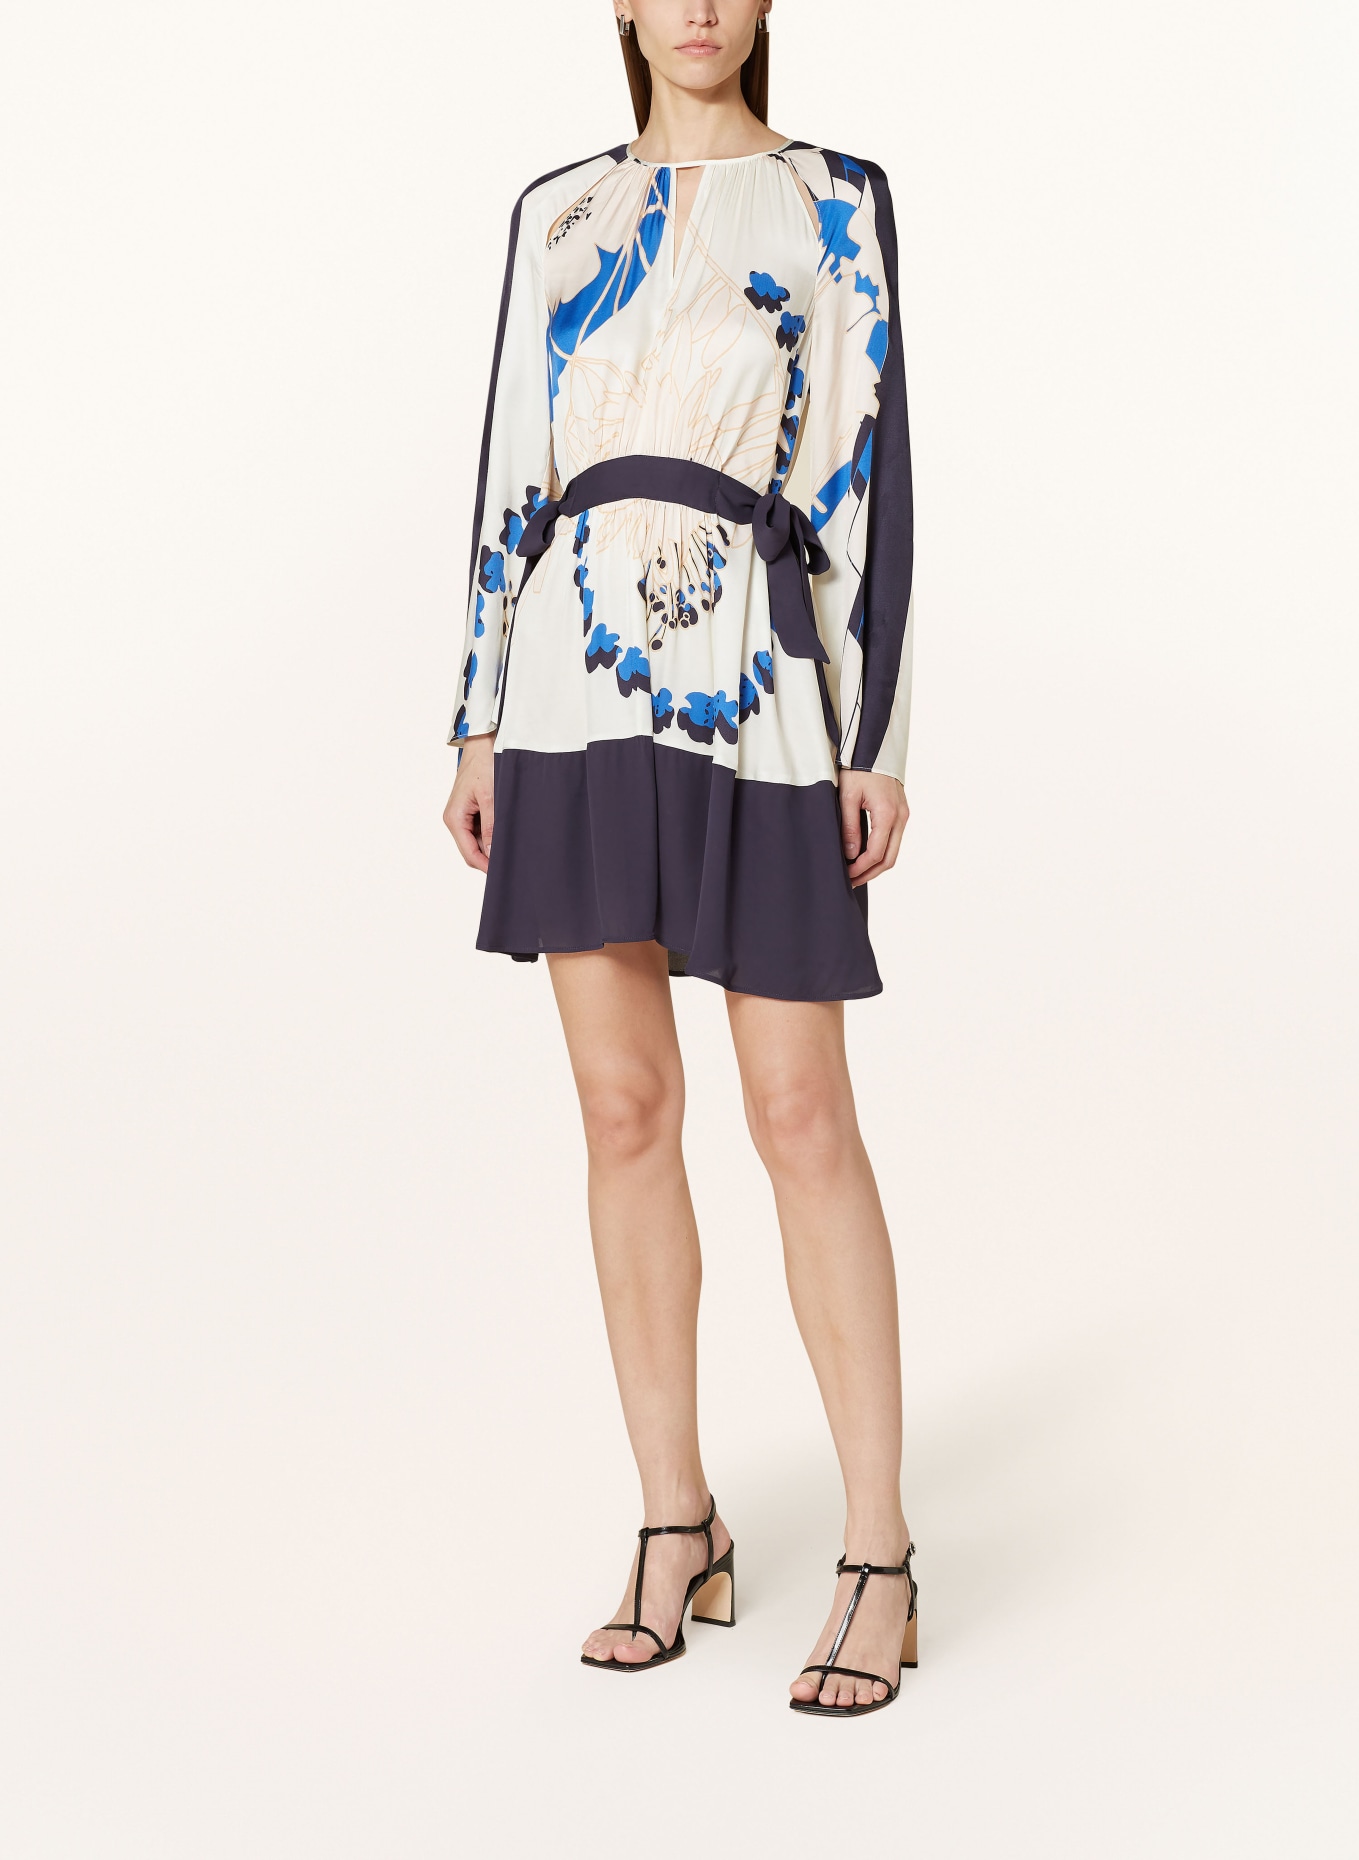 REISS Dress SASHA in mixed materials with cut-outs, Color: CREAM/ DARK BLUE/ BLUE (Image 2)